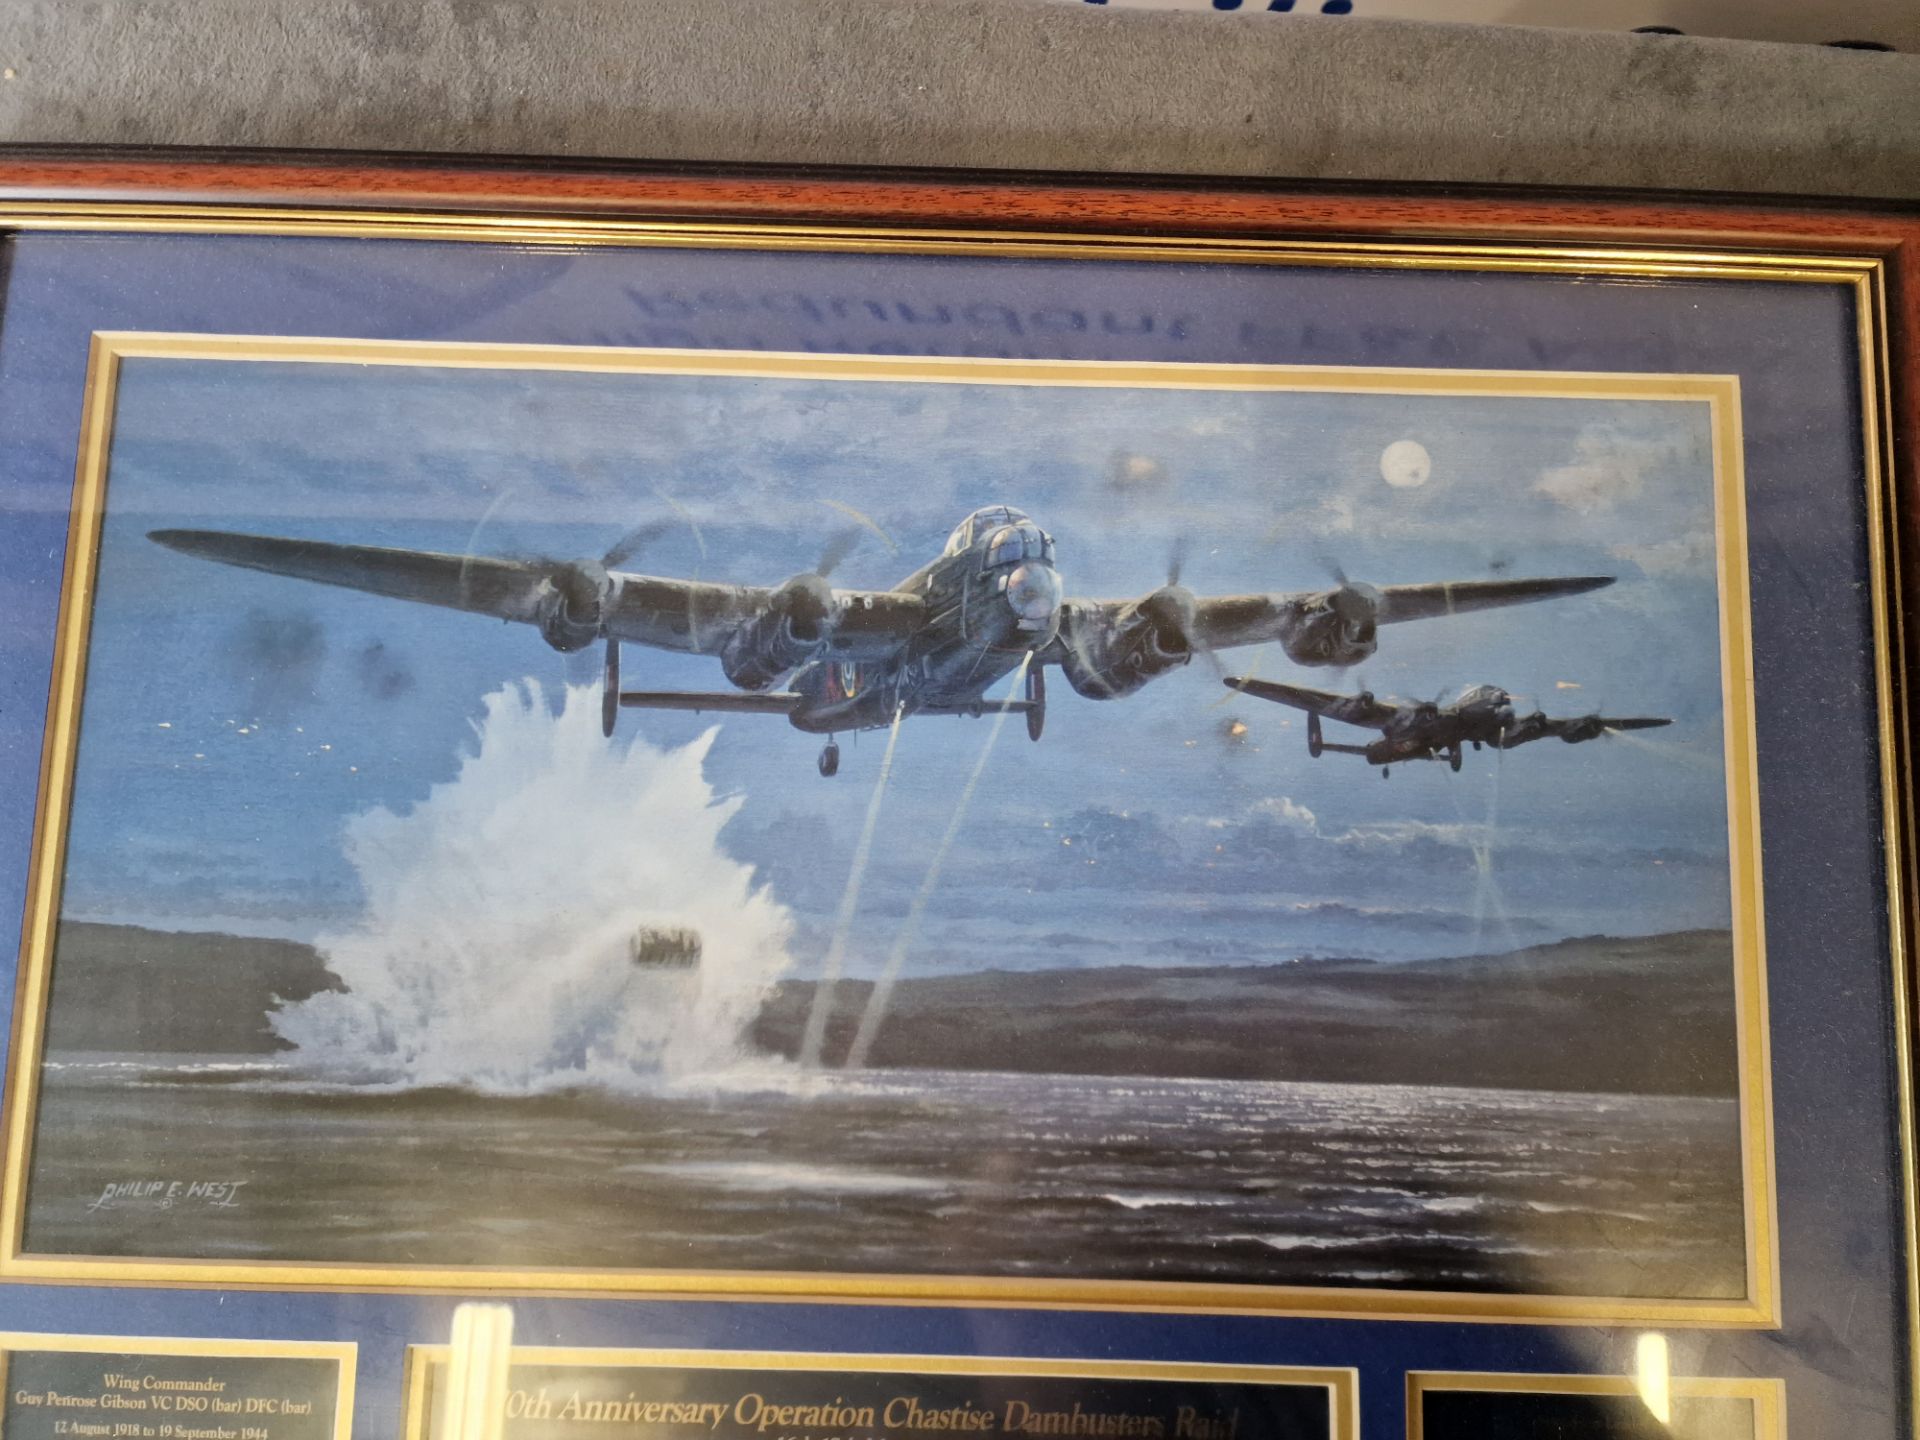 Lancaster Dambusters Commemorative Print Limited To 4999 Editions With Artwork By Philip West. The